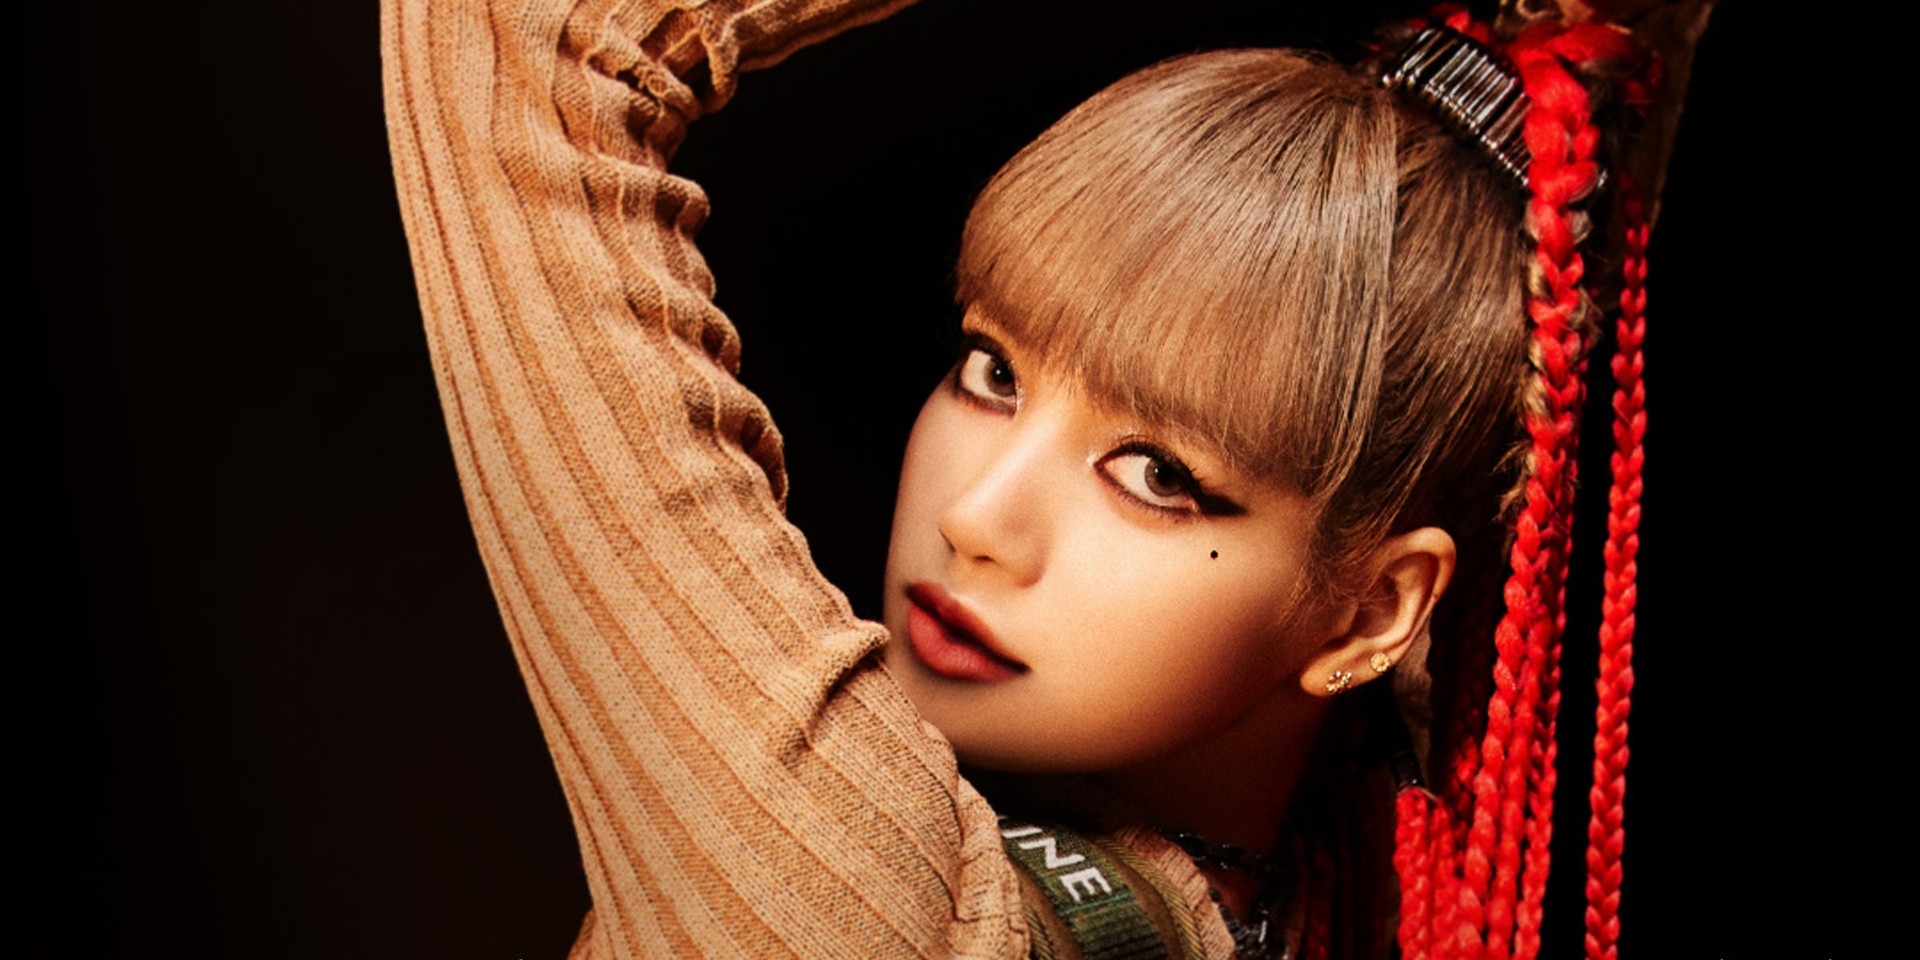 BLACKPINK's LISA to drop live performance video of 'MONEY' this week